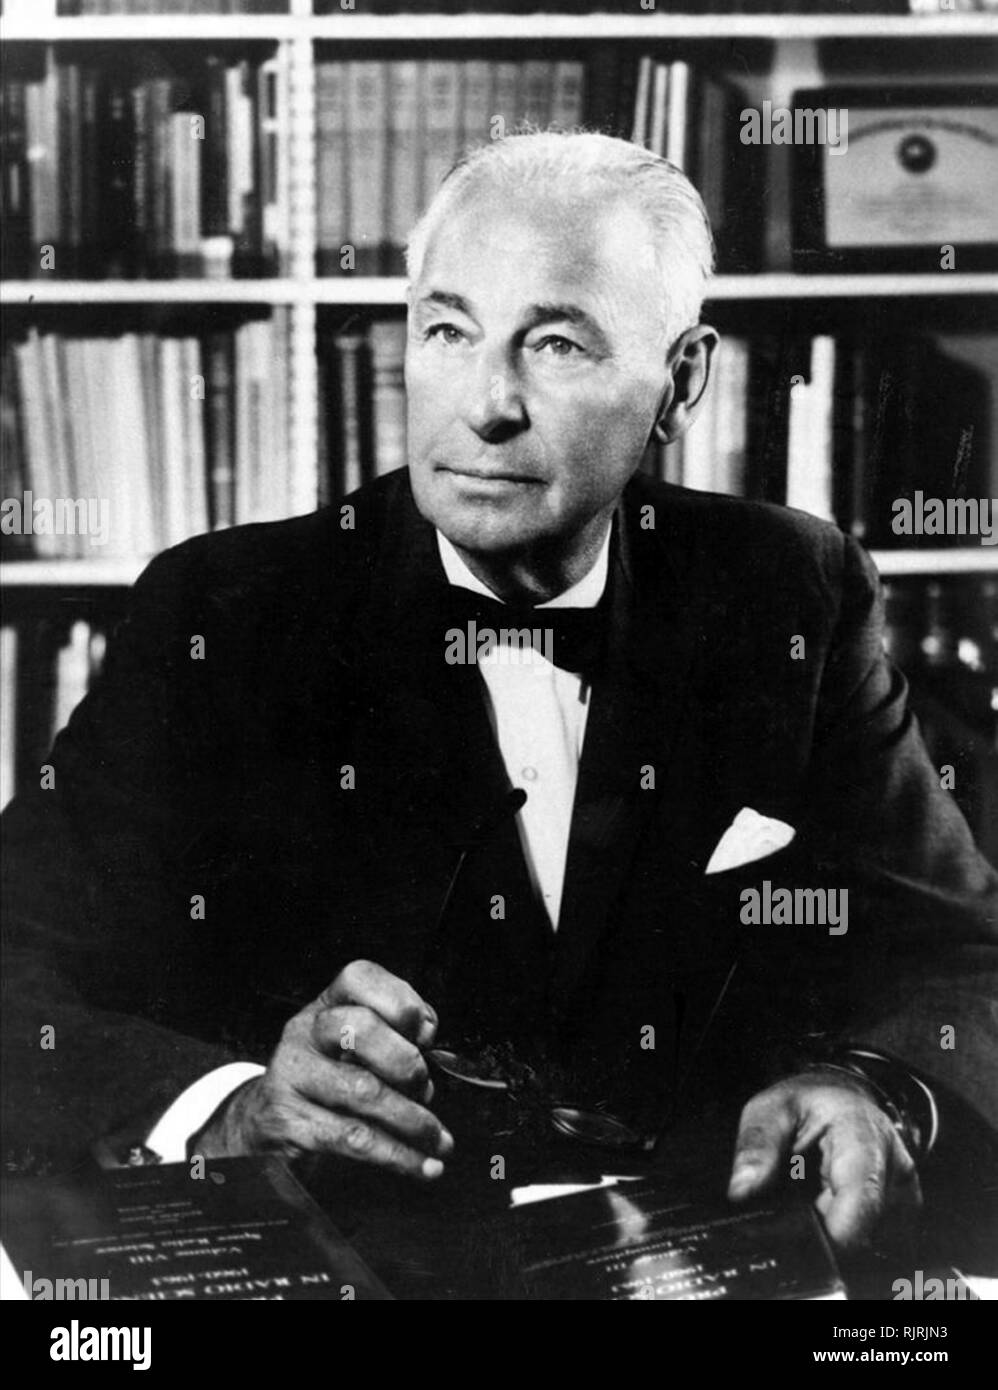 Lloyd Viel Berkner (1905 - 1967), American physicist and engineer. He was one of the inventors of the measuring device that since has become standard at ionospheric stations. He was a named member of the In UFO conspiracy theories, Majestic 12 (or MJ-12); code name of an alleged secret committee of scientists, military leaders, and government officials, formed in 1947 by an executive order by U.S. President Harry S. Truman to facilitate recovery and investigation of alien spacecraft Stock Photo